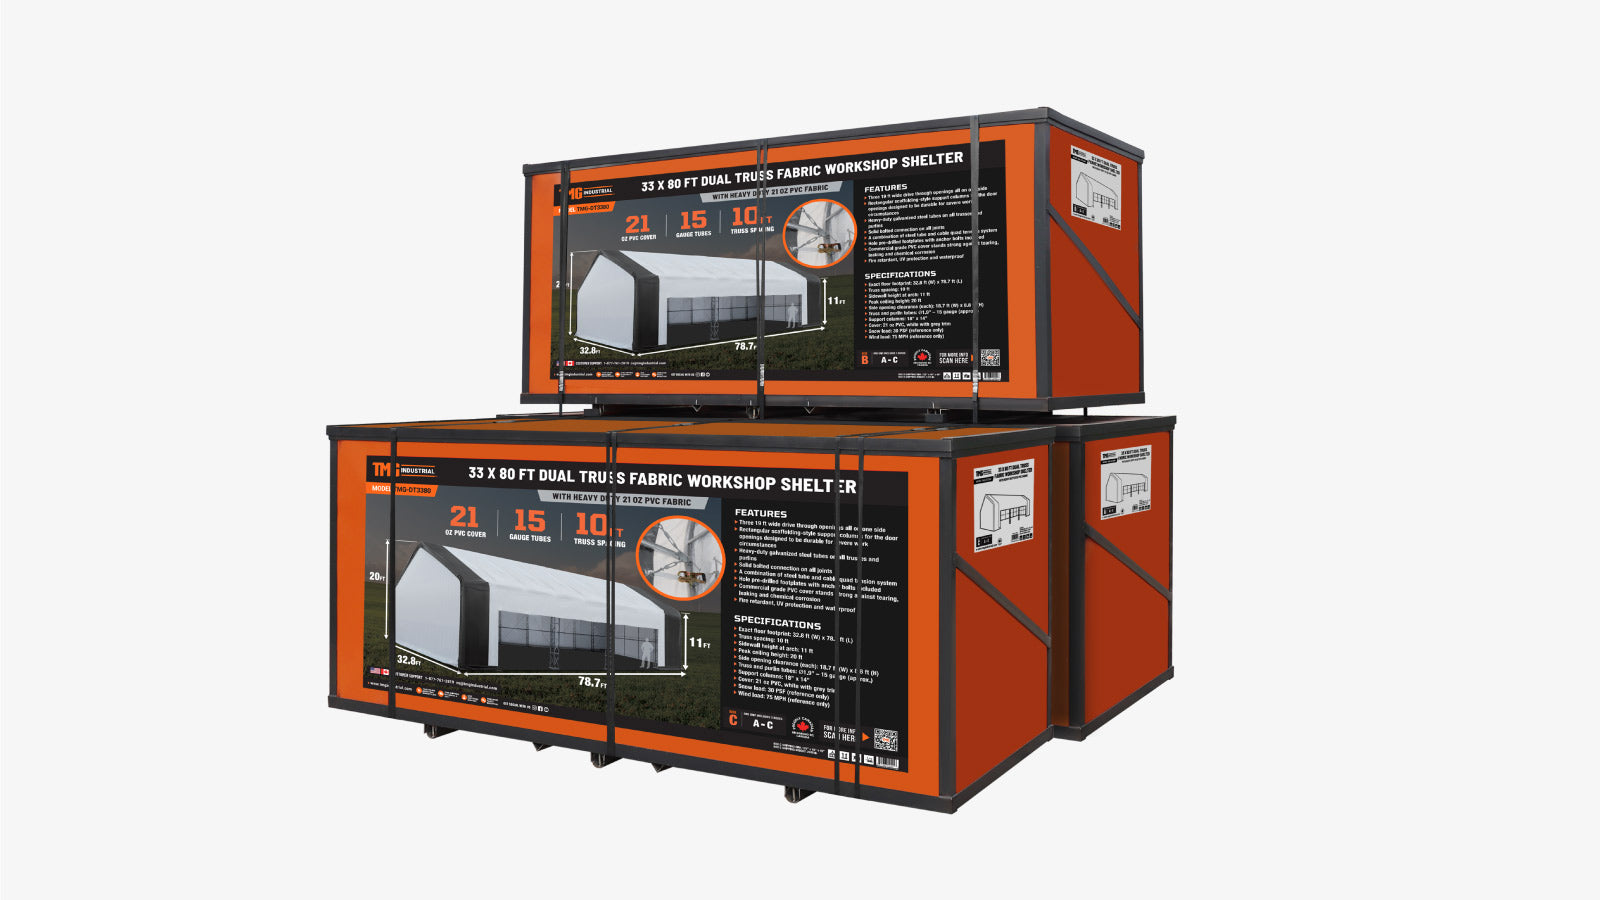 TMG Industrial 80’ x 33’ Dual Truss Storage Shelter Workshop, (3) 19’ Wide Drive-Through Openings, Scaffolding-Style Door Frame Support, TMG-DT3380-shipping-info-image